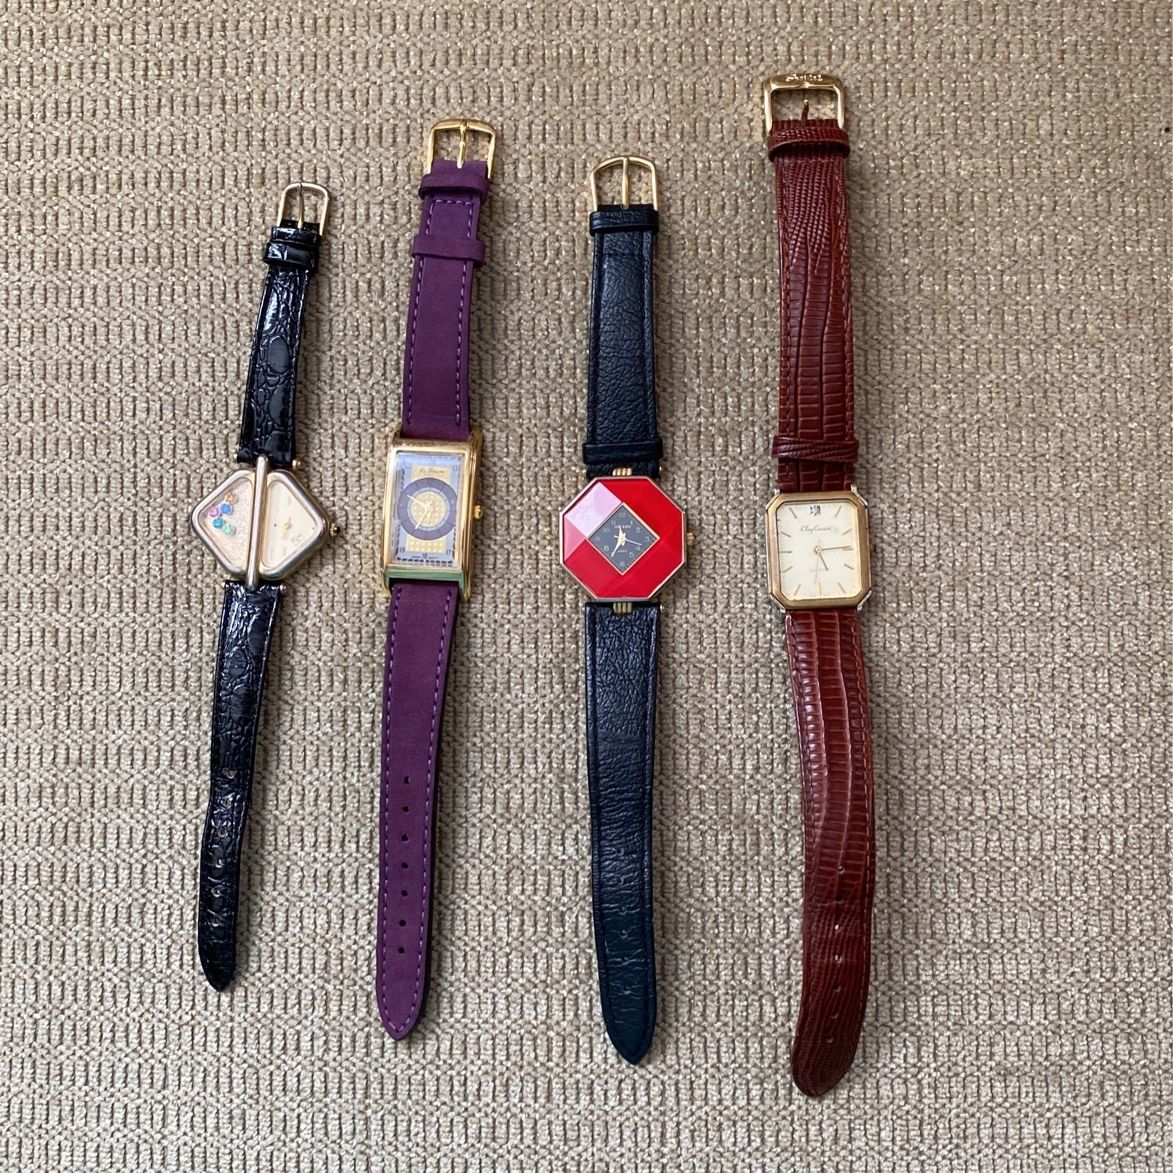 Watches (Get All 4 For One Price)